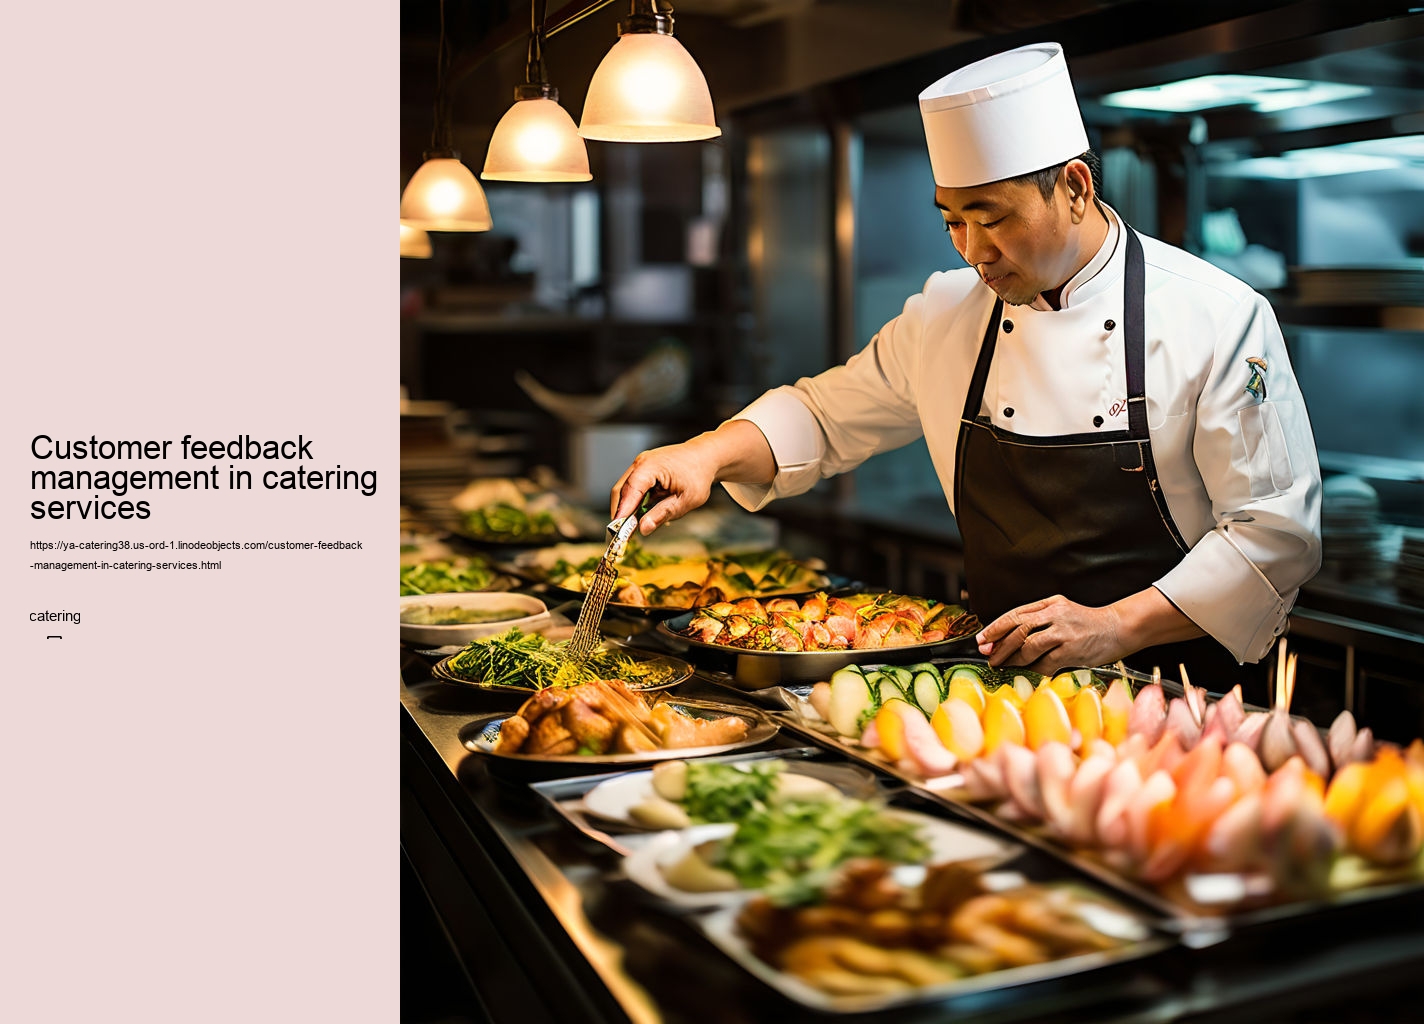 Customer feedback management in catering services